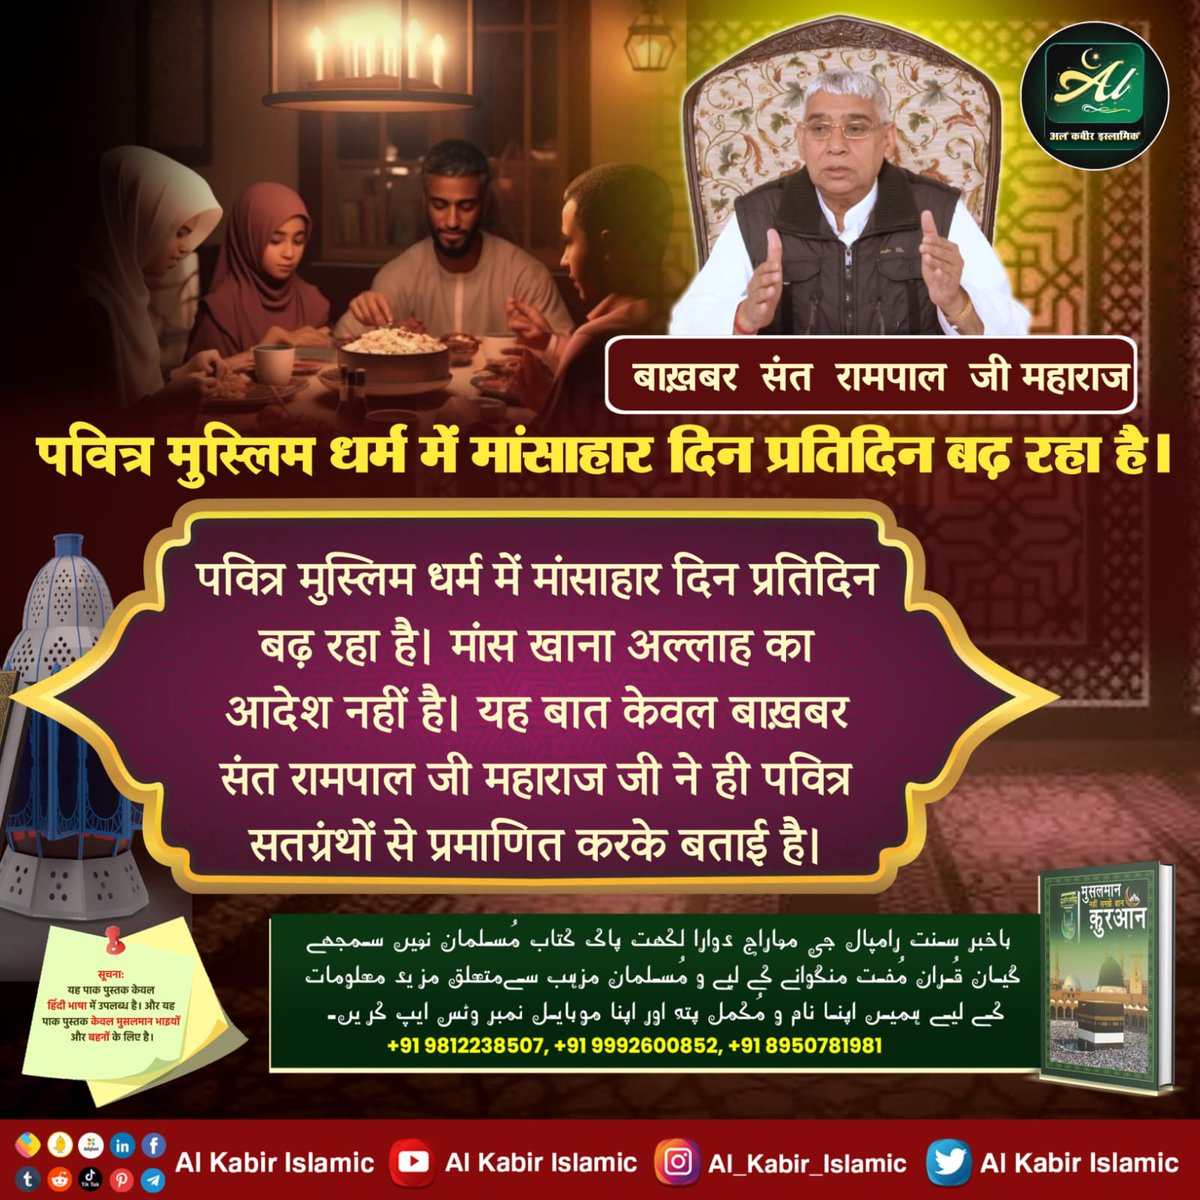 #रहम_करो_मूक_जीवों_पर On the one hand, Muslim brothers torture themselves to please Allah, on the other hand the creatures eat their flesh by committing violence. Eating meat is not the command of Allah. How will Allah be happy like this.